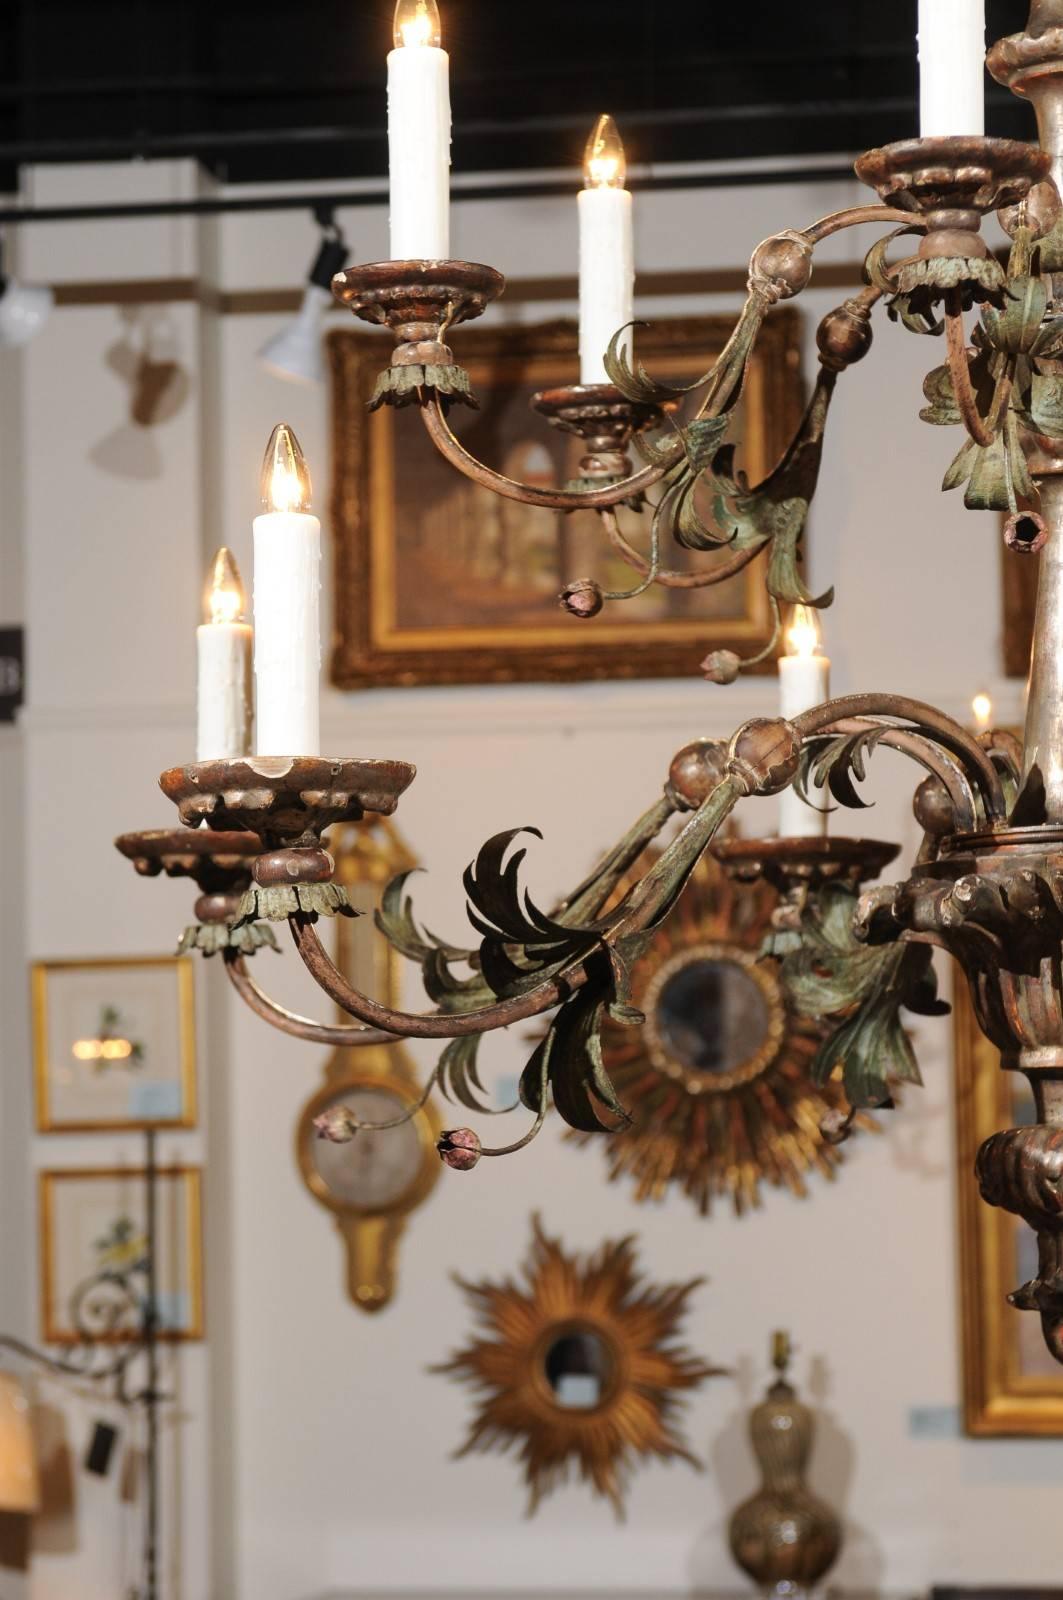 19th Century Italian Silver Gilt and Painted Tole 12-Light Chandelier from the Tuscany Region